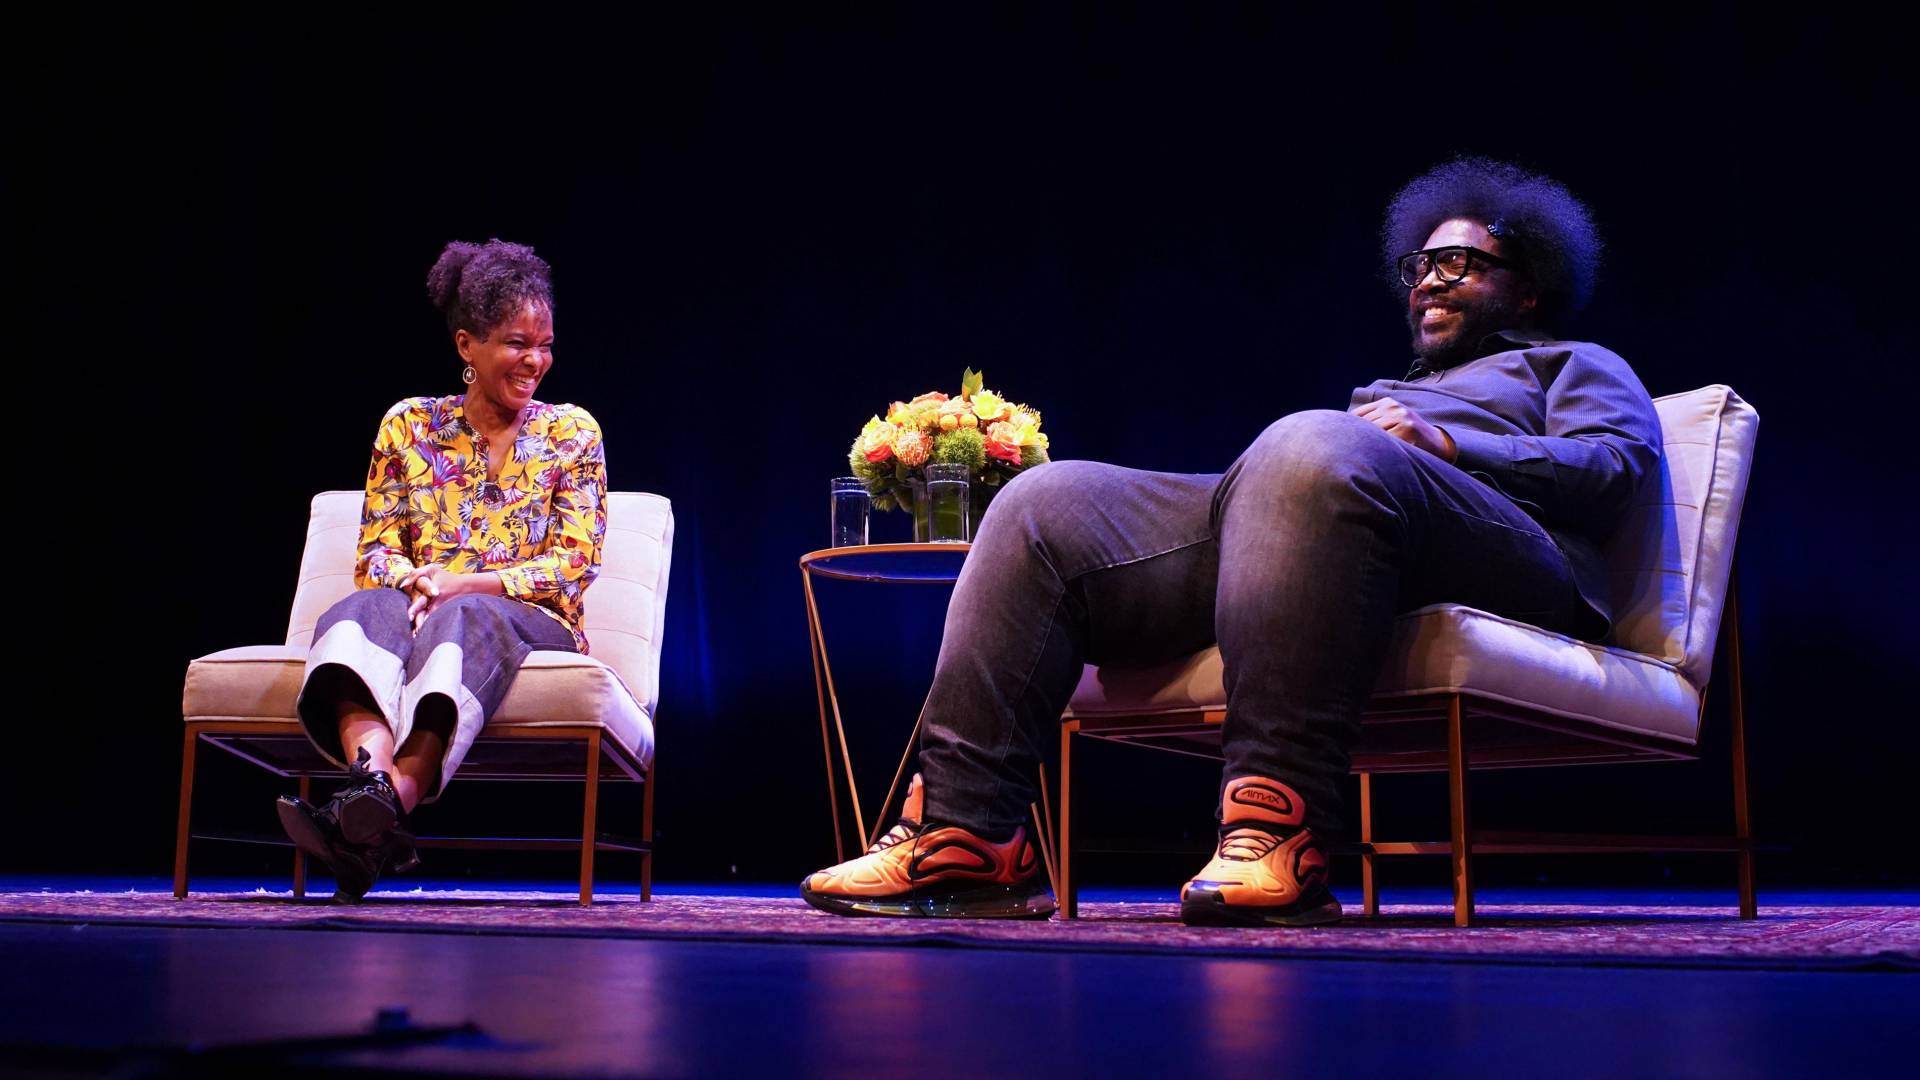 Imani Perry and Questlove speaking with each other on stage